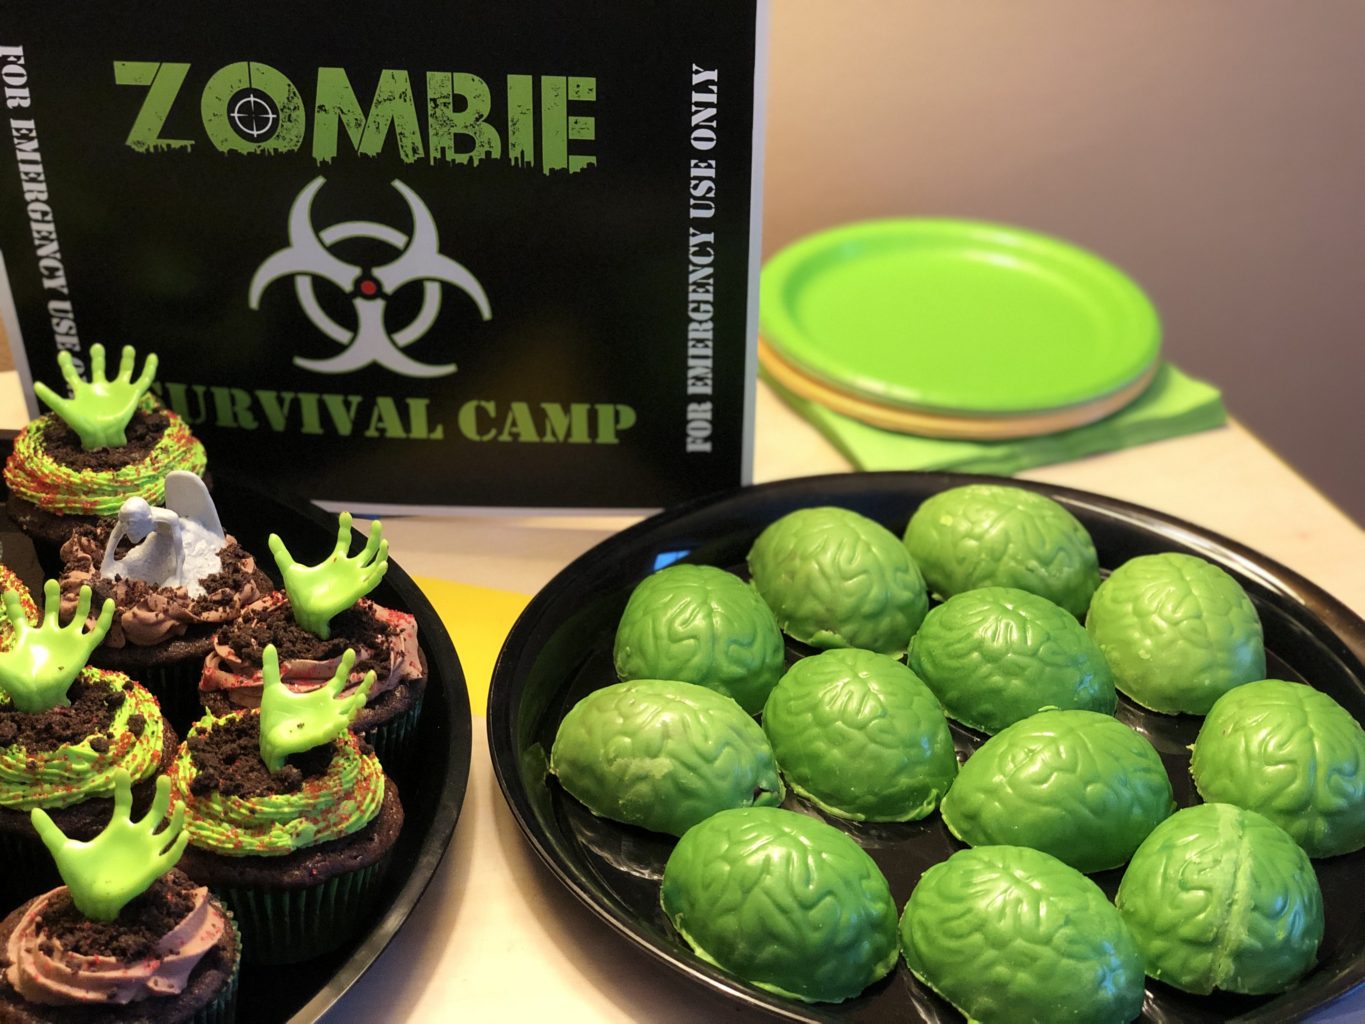 Zombie Apoocalypse Theme Party Details: Kids Birthday Theme Walking Dead Viewing Party food, decor, printables, favors #zombie #party #walkingdead